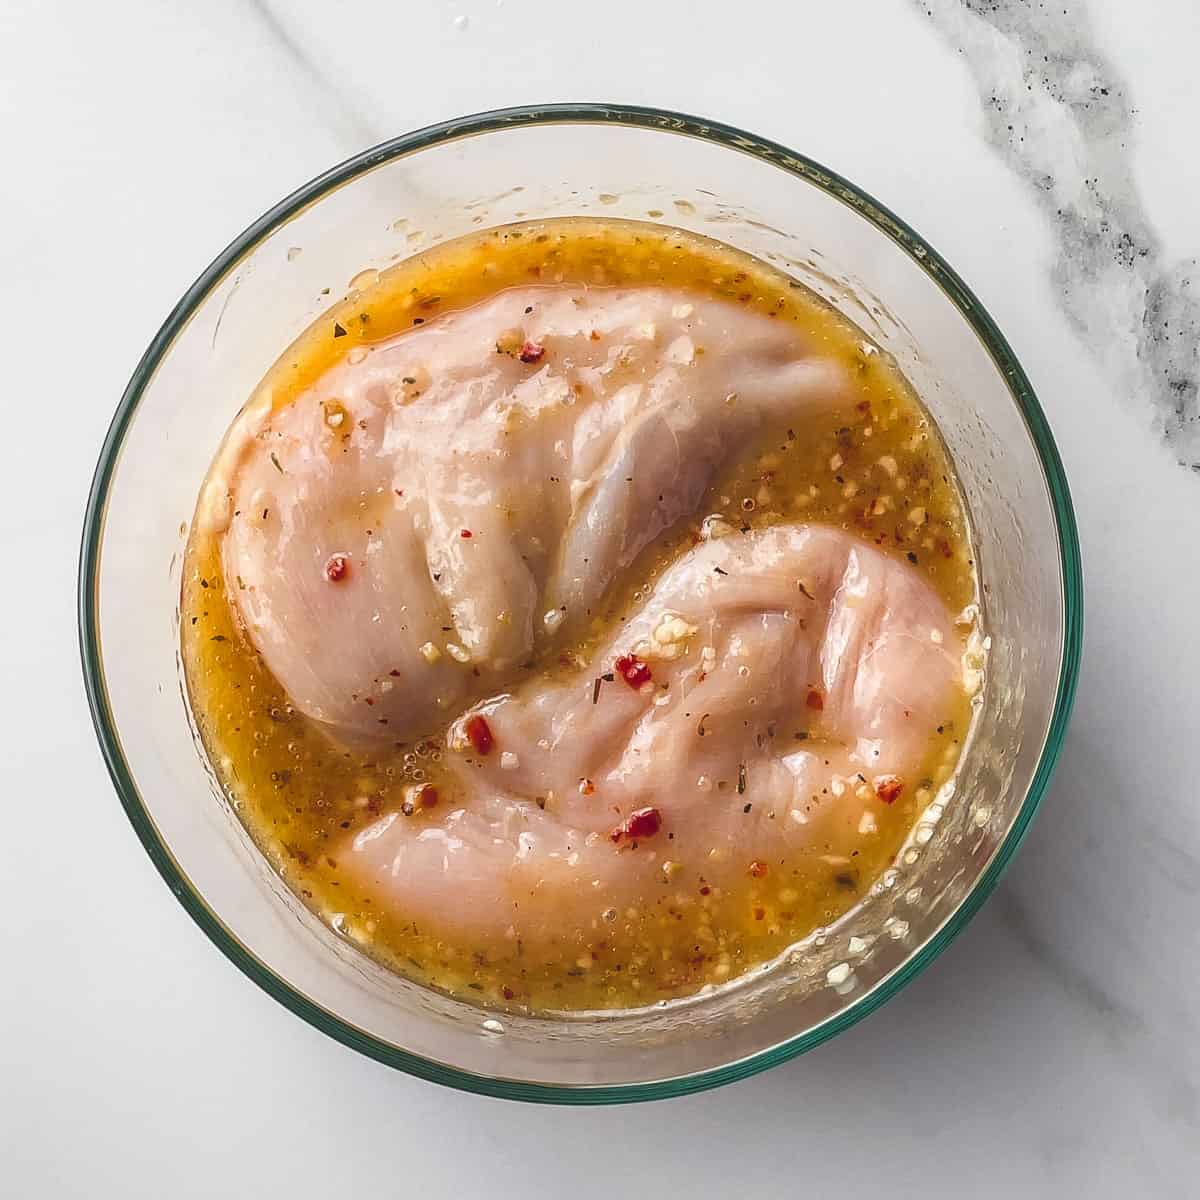 chicken breasts marinating in Italian dressing and garlic in a bowl